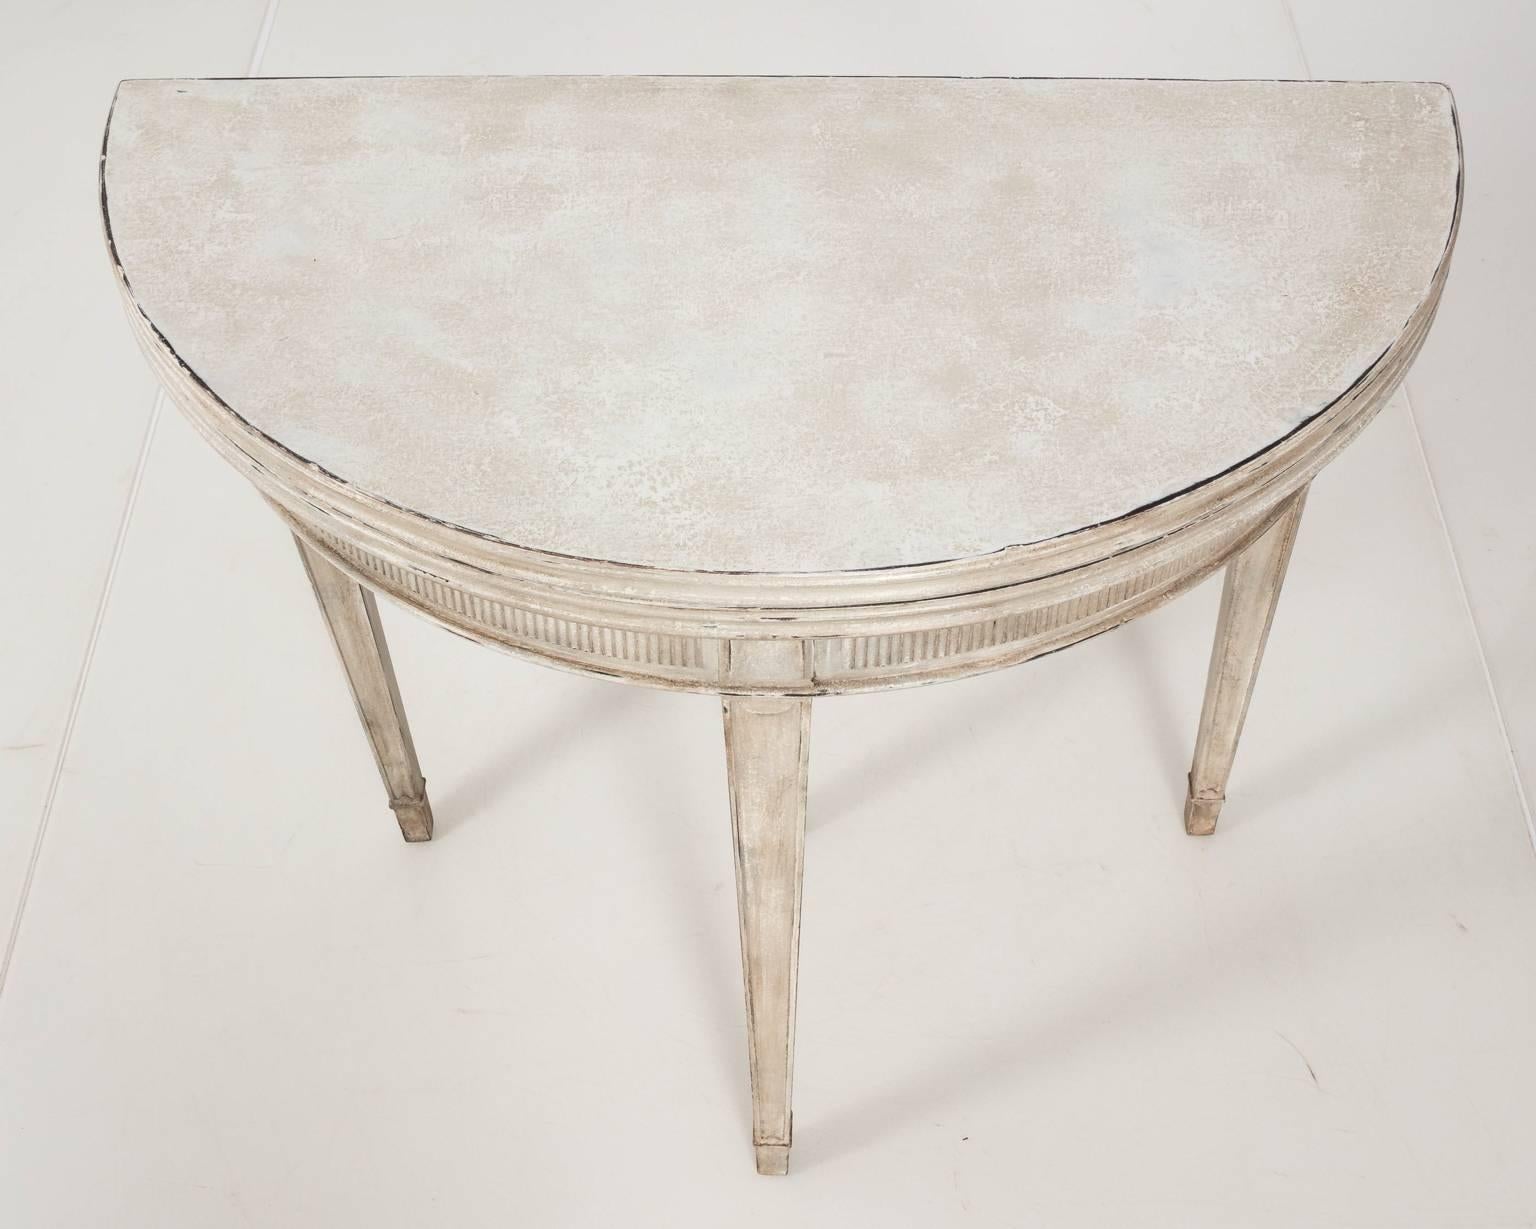 Gustavian style grey painted flip-top demilune table that opens to a 31.00 inch round diameter, circa 1940s.